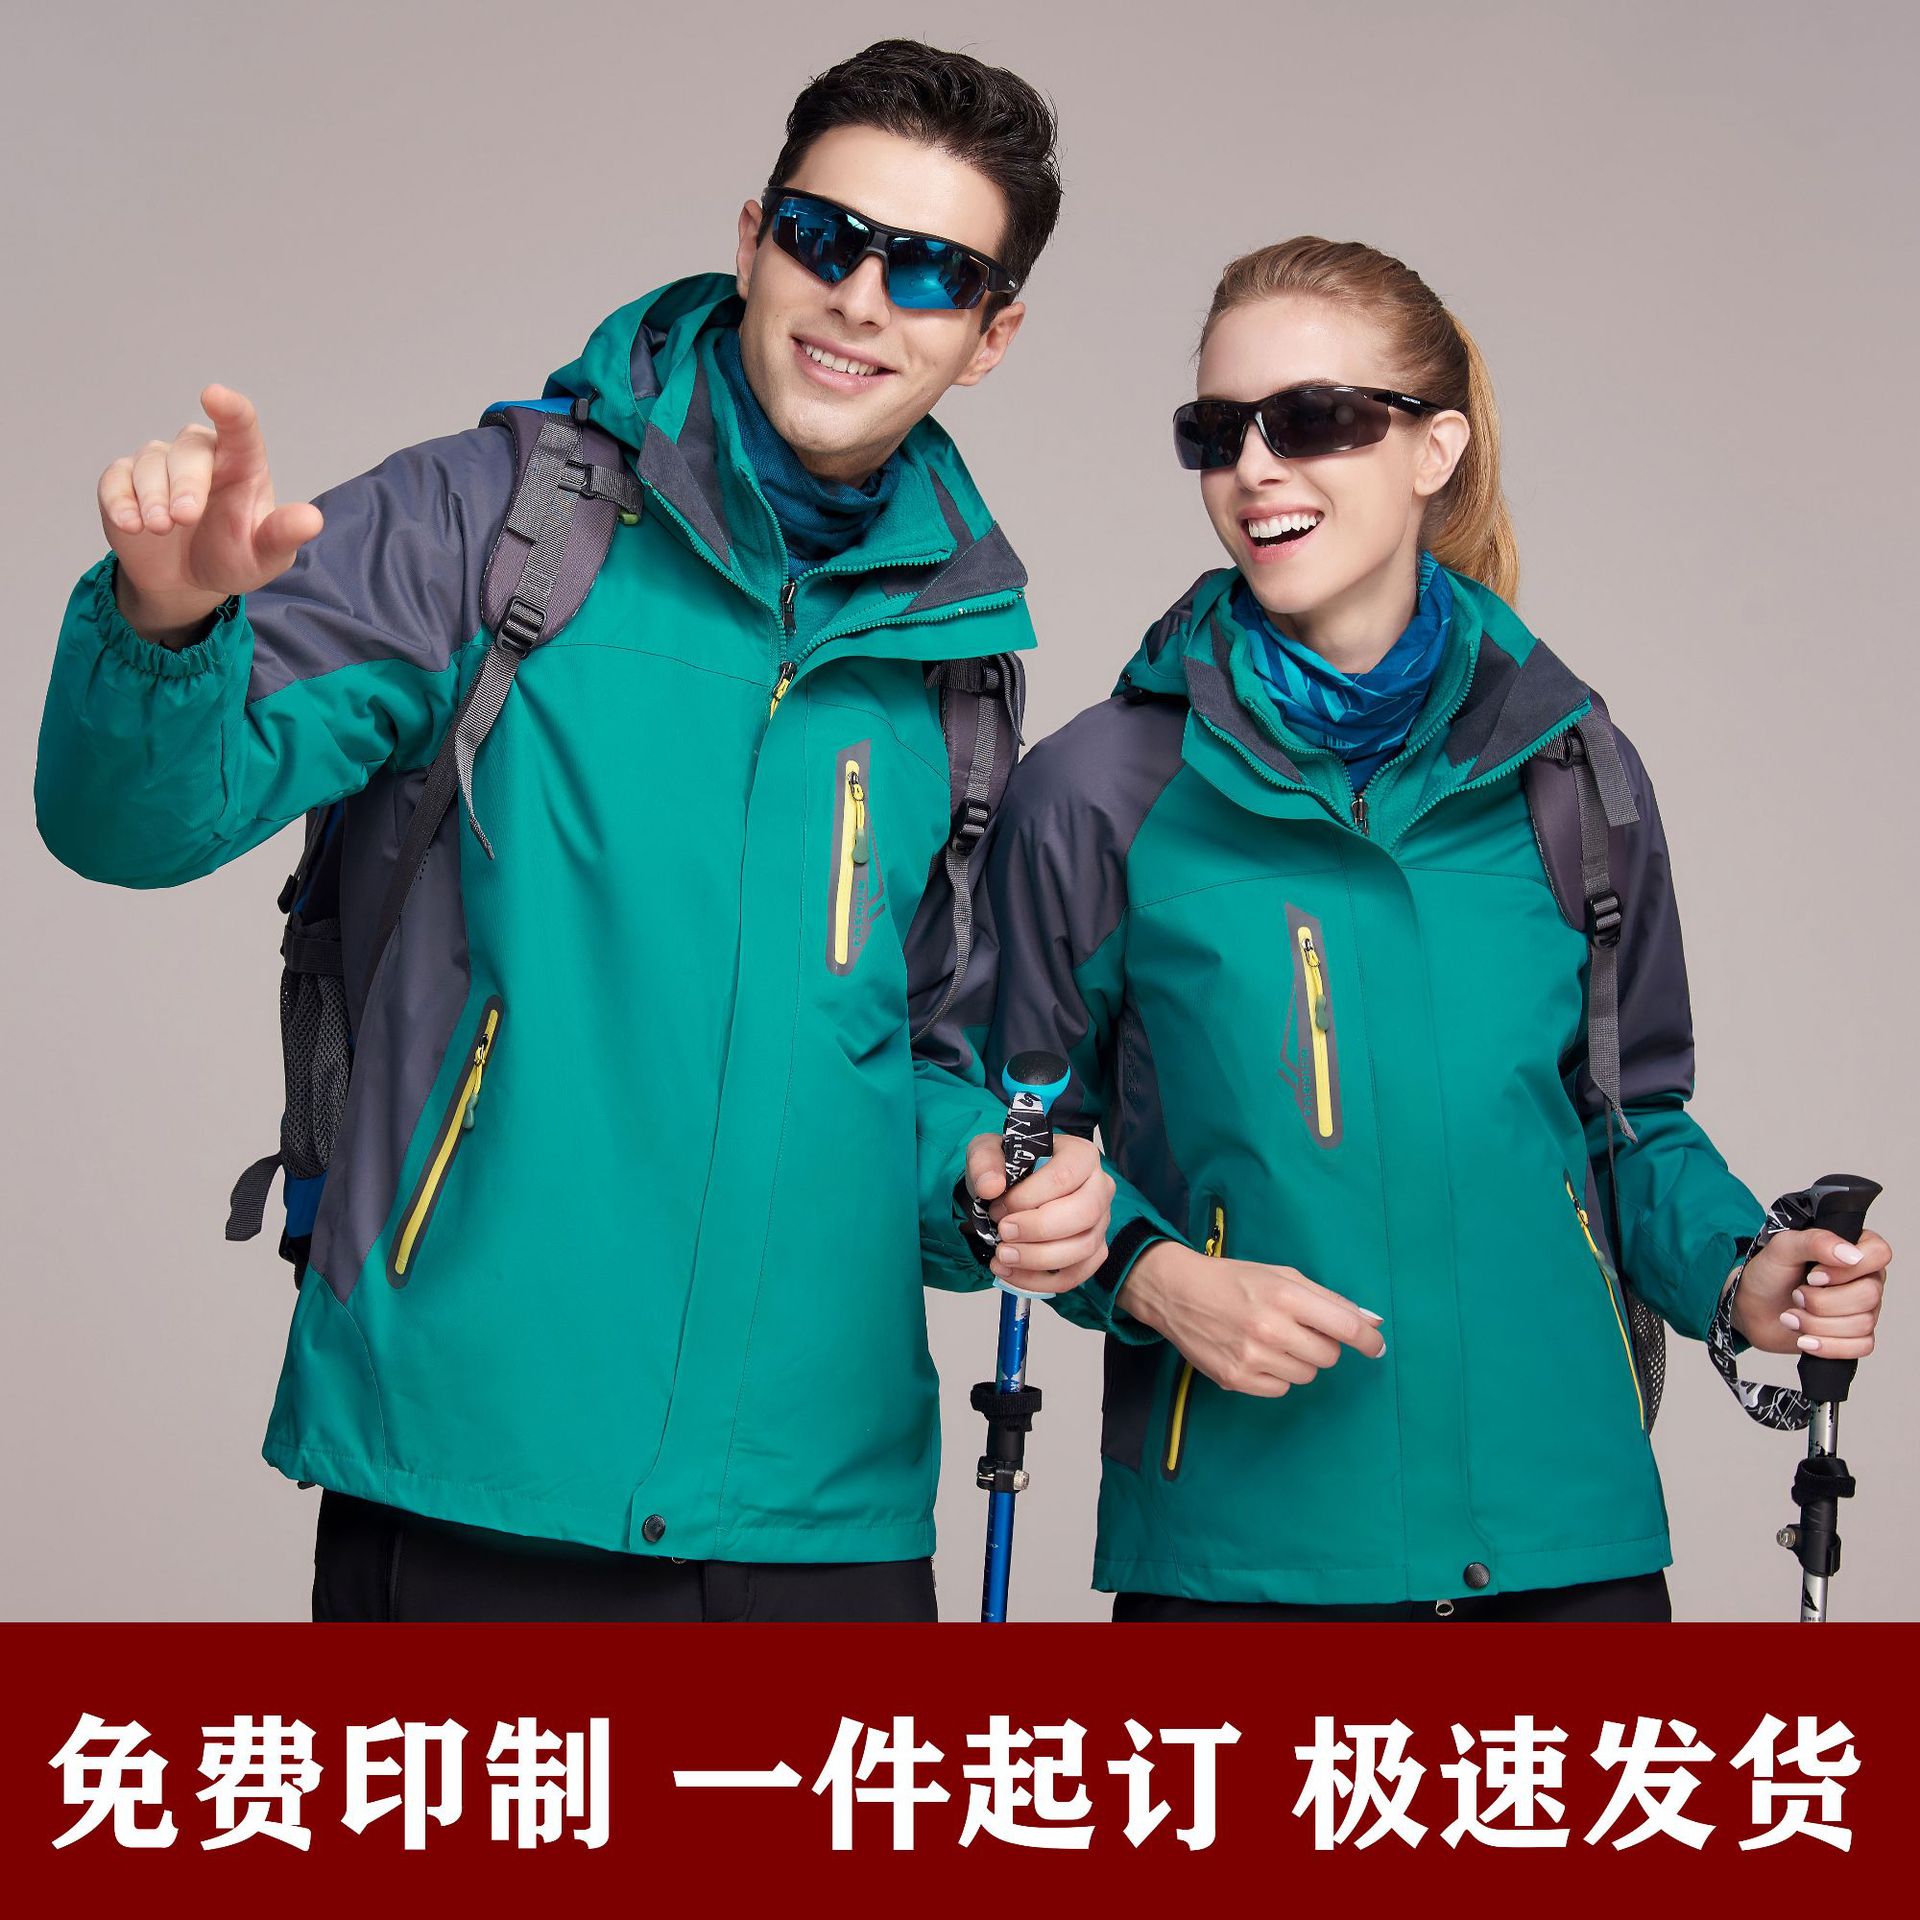 Waterproof Jacket Customized Express Work Clothes Printing Fleece-Lined Rider Coat 4S Shop Three-in-One Workwear Logo Picture